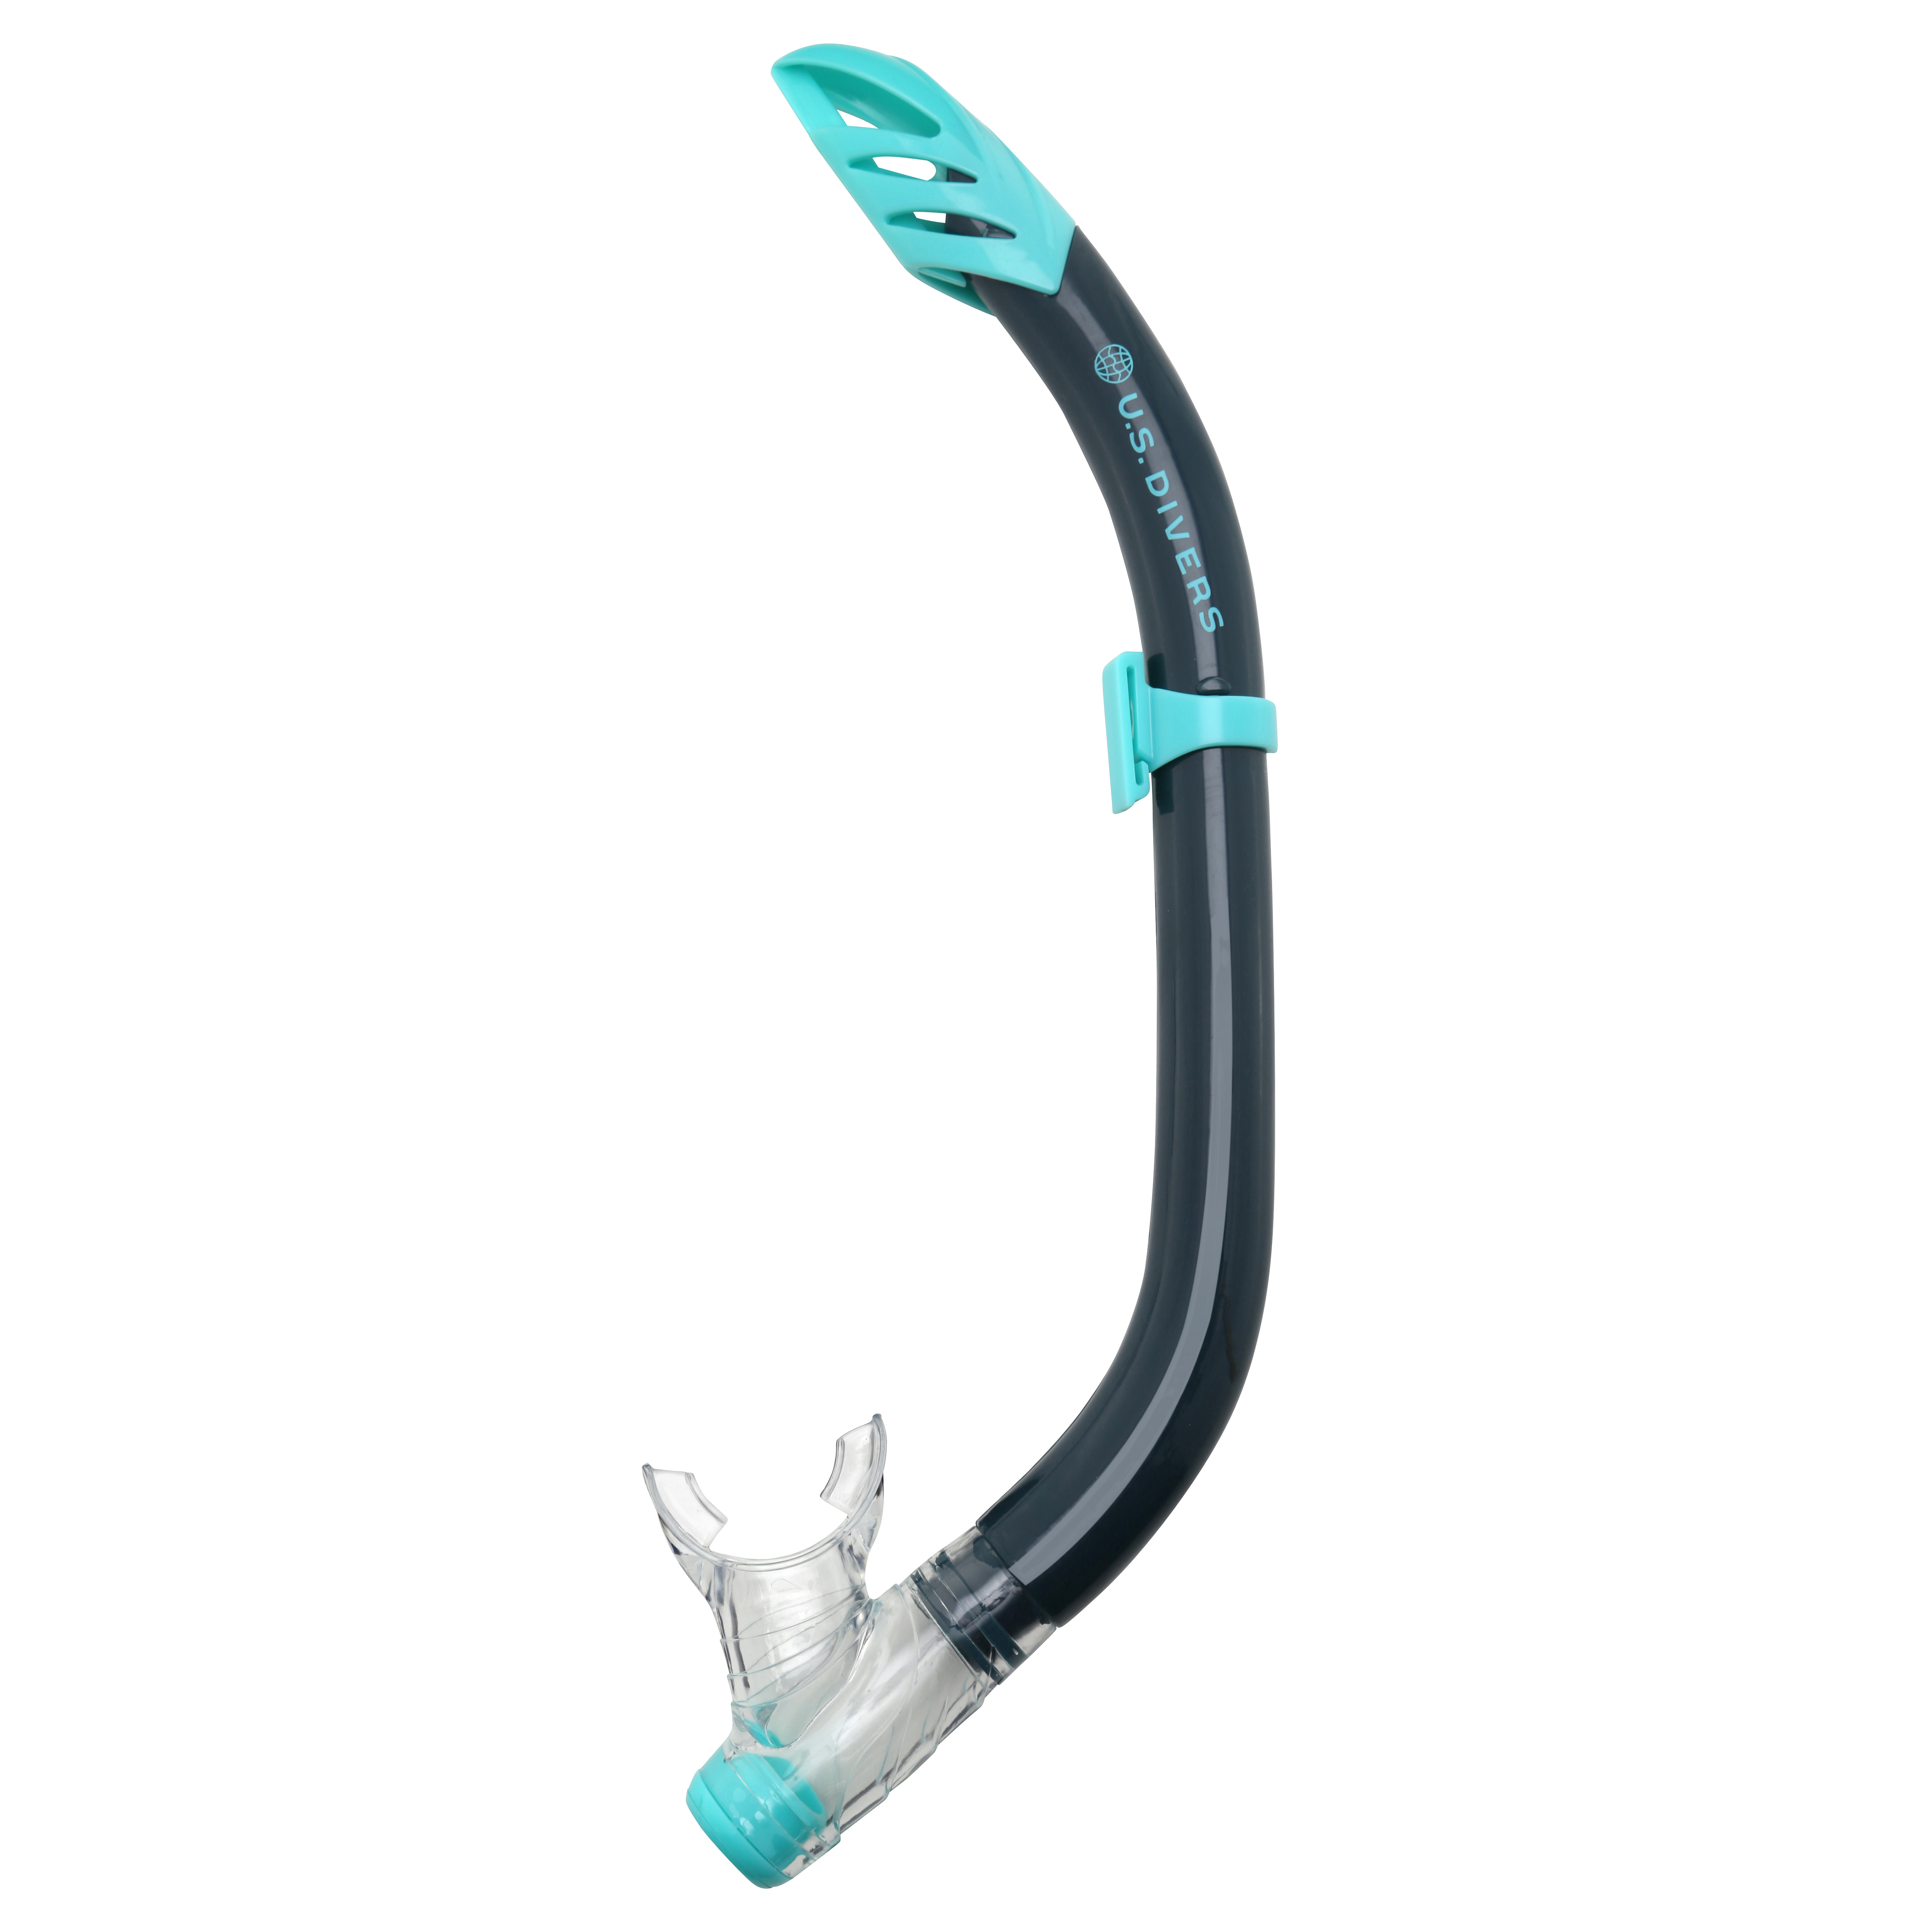 U.S. Divers Playa Adult Snorkeling Combo - Mask and Snorkel Included (Teal & Blue) - image 5 of 10